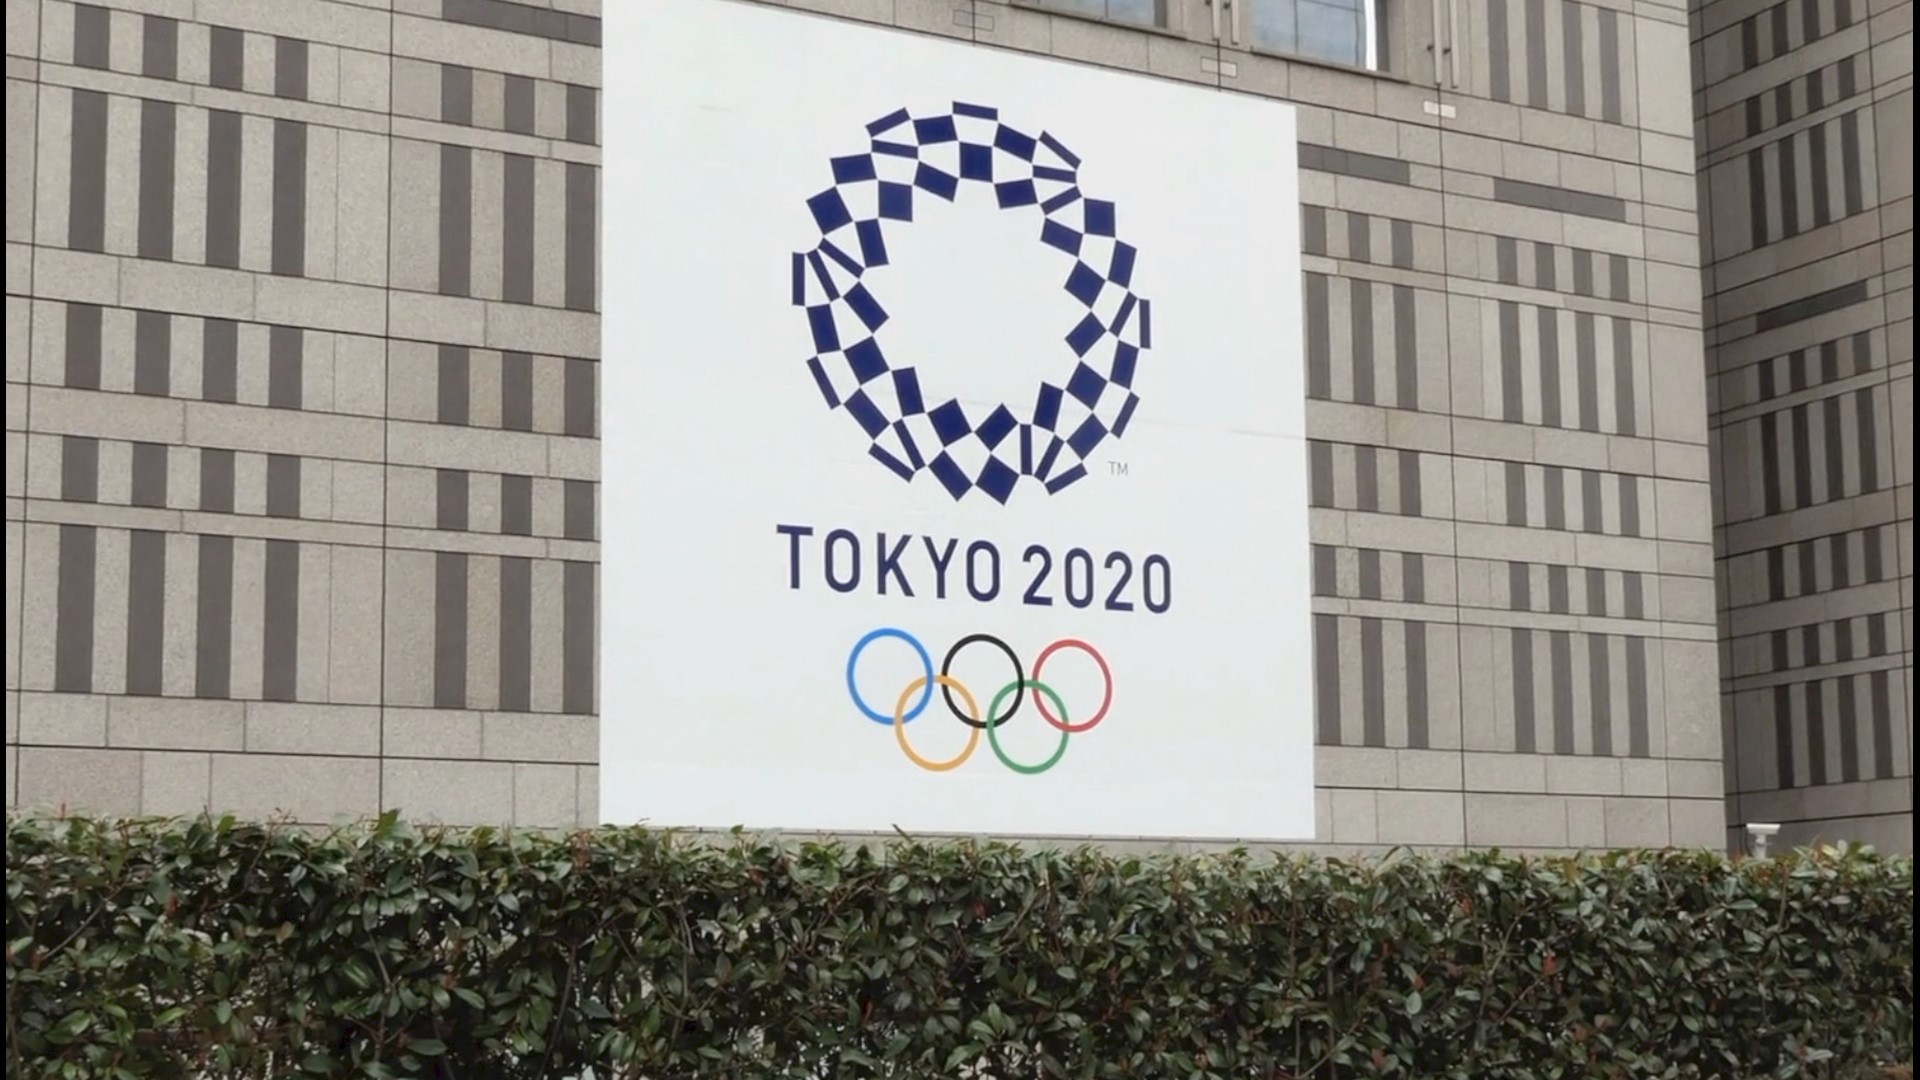 As the coronavirus continues to spread, the World Health Organization says there is no reason to cancel the Olympics. Veuer's Tony Spitz has the details.